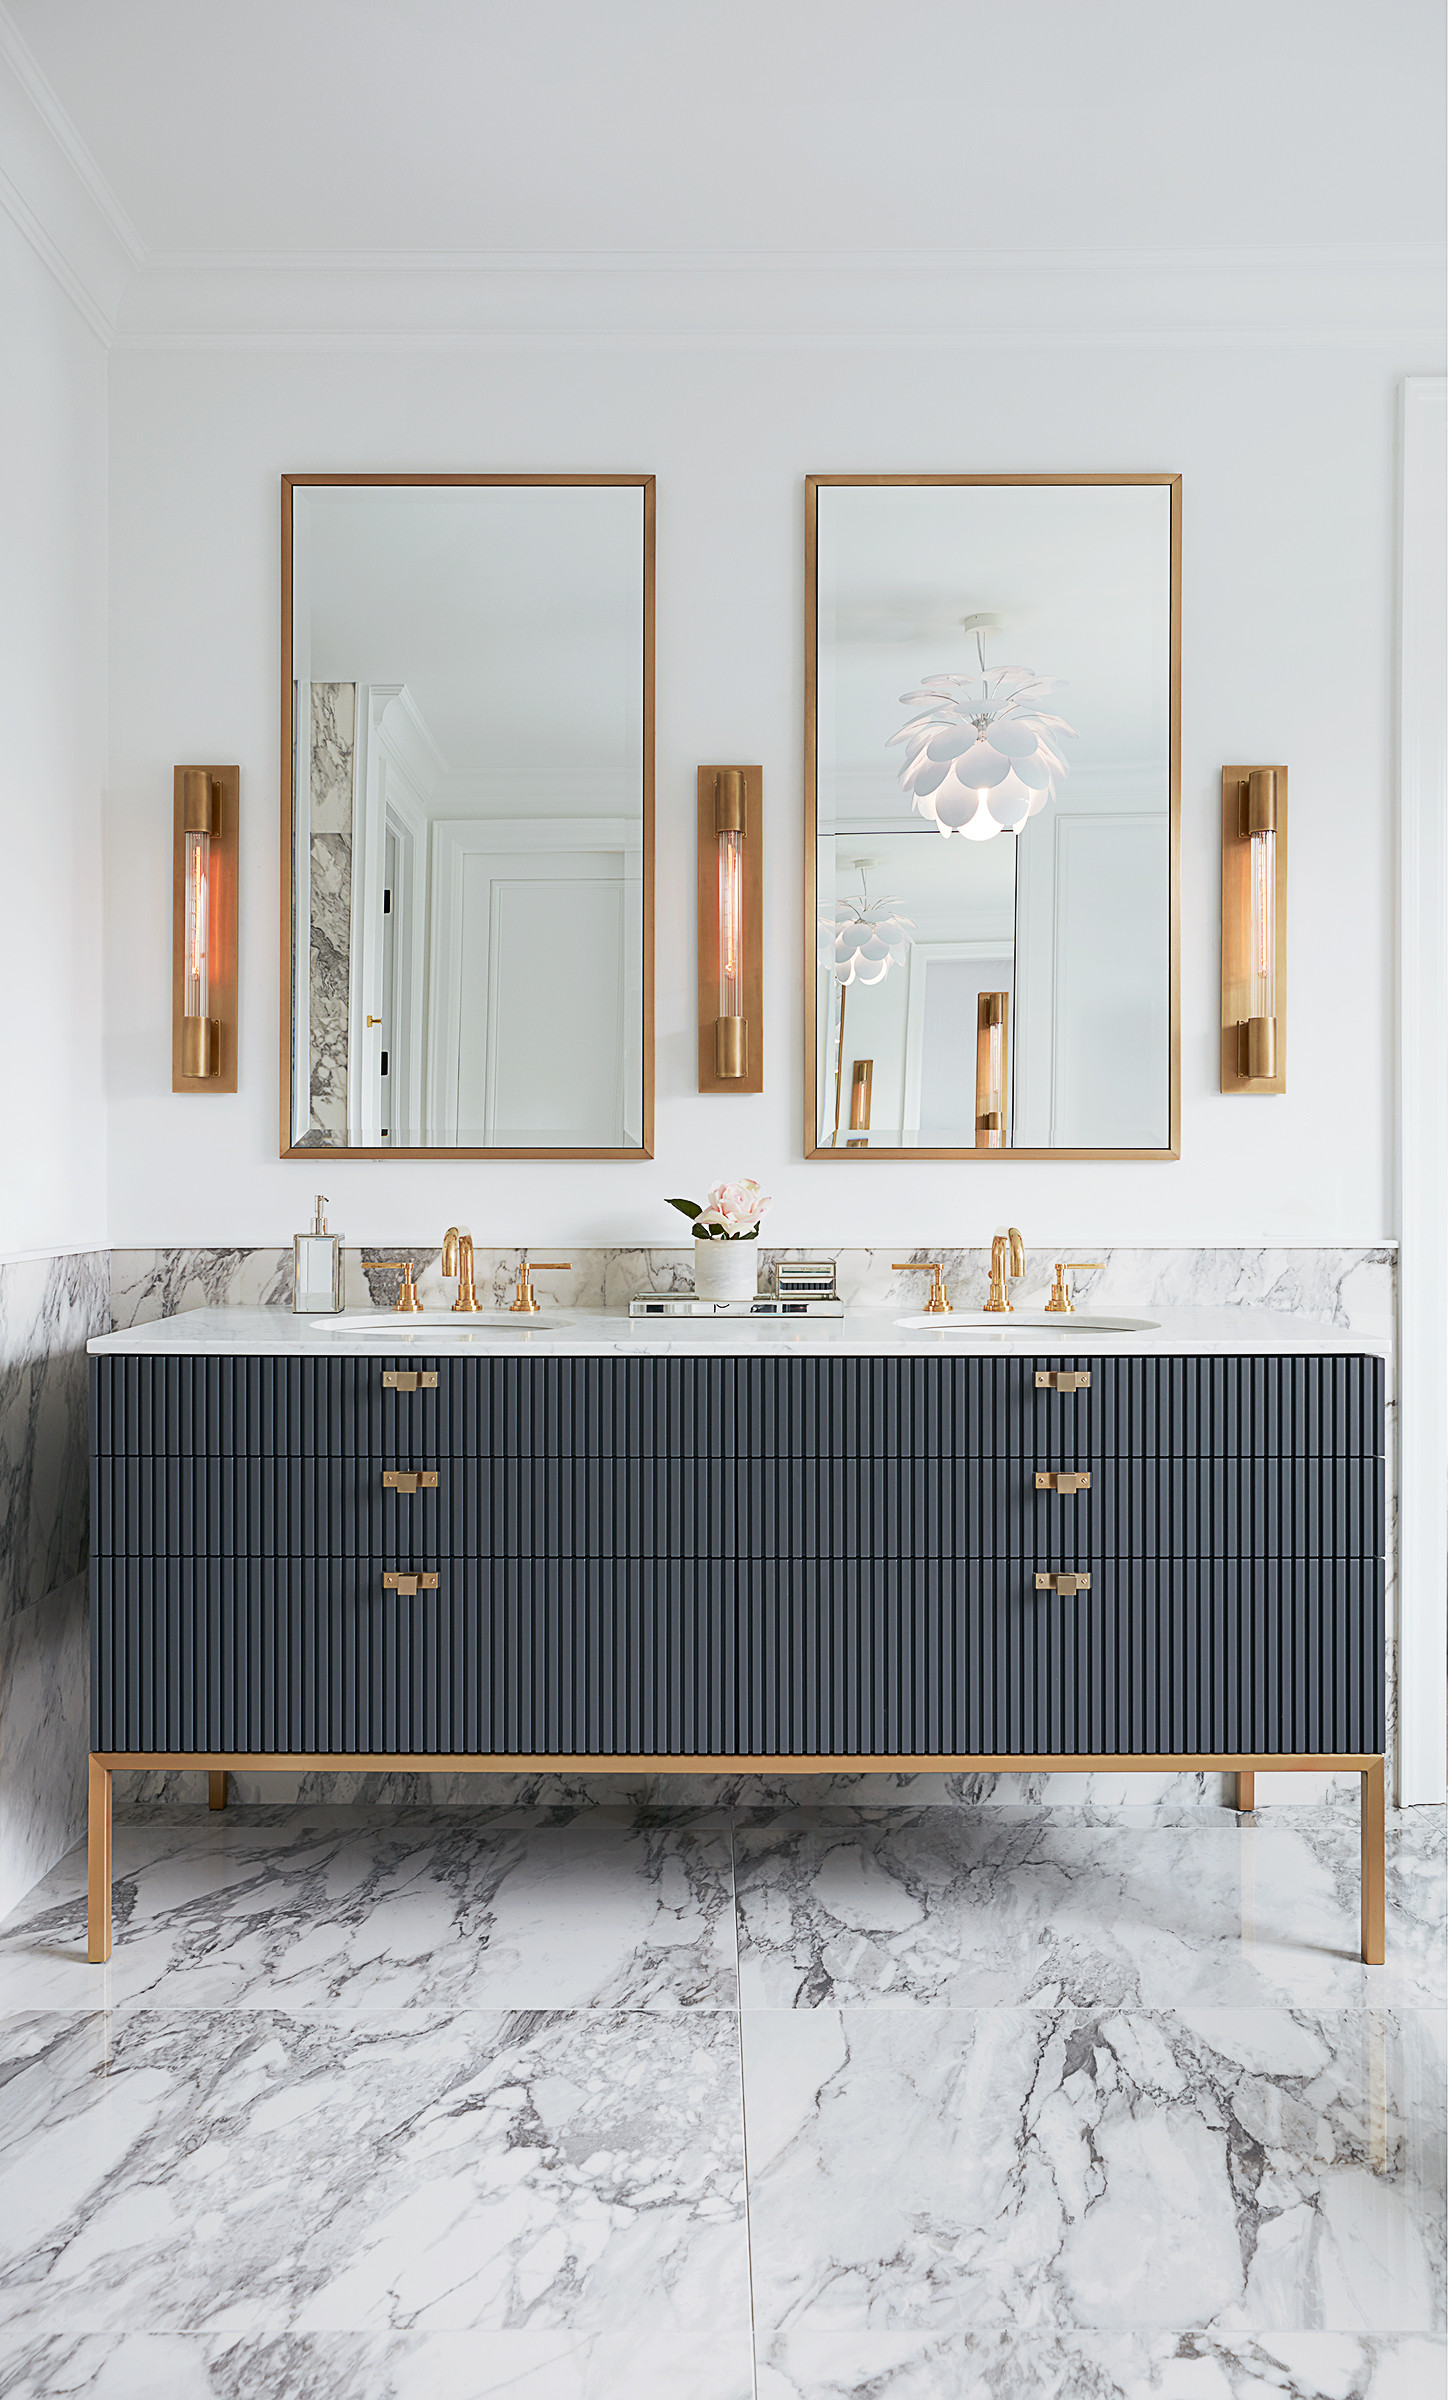 https://st.hzcdn.com/simgs/pictures/bathrooms/sleek-modern-home-with-brass-and-quartz-accents-chervin-kitchen-and-bath-inc-img~4fa105690f885744_14-5667-1-6bc6167.jpg